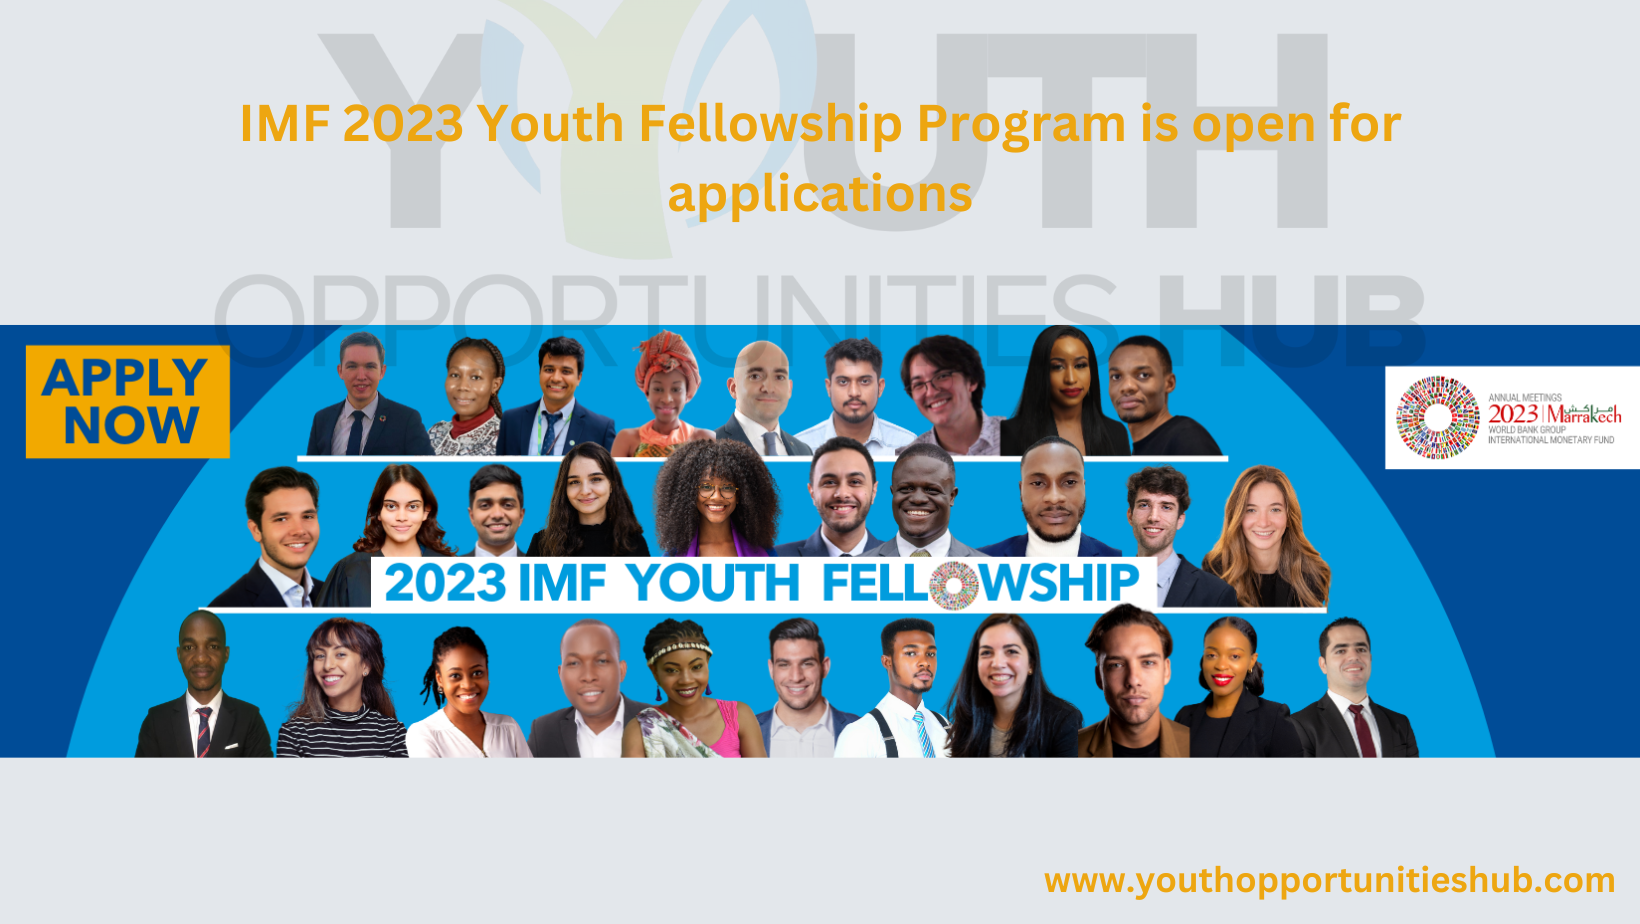 IMF 2023 Youth Fellowship Program is open for applications » Youth